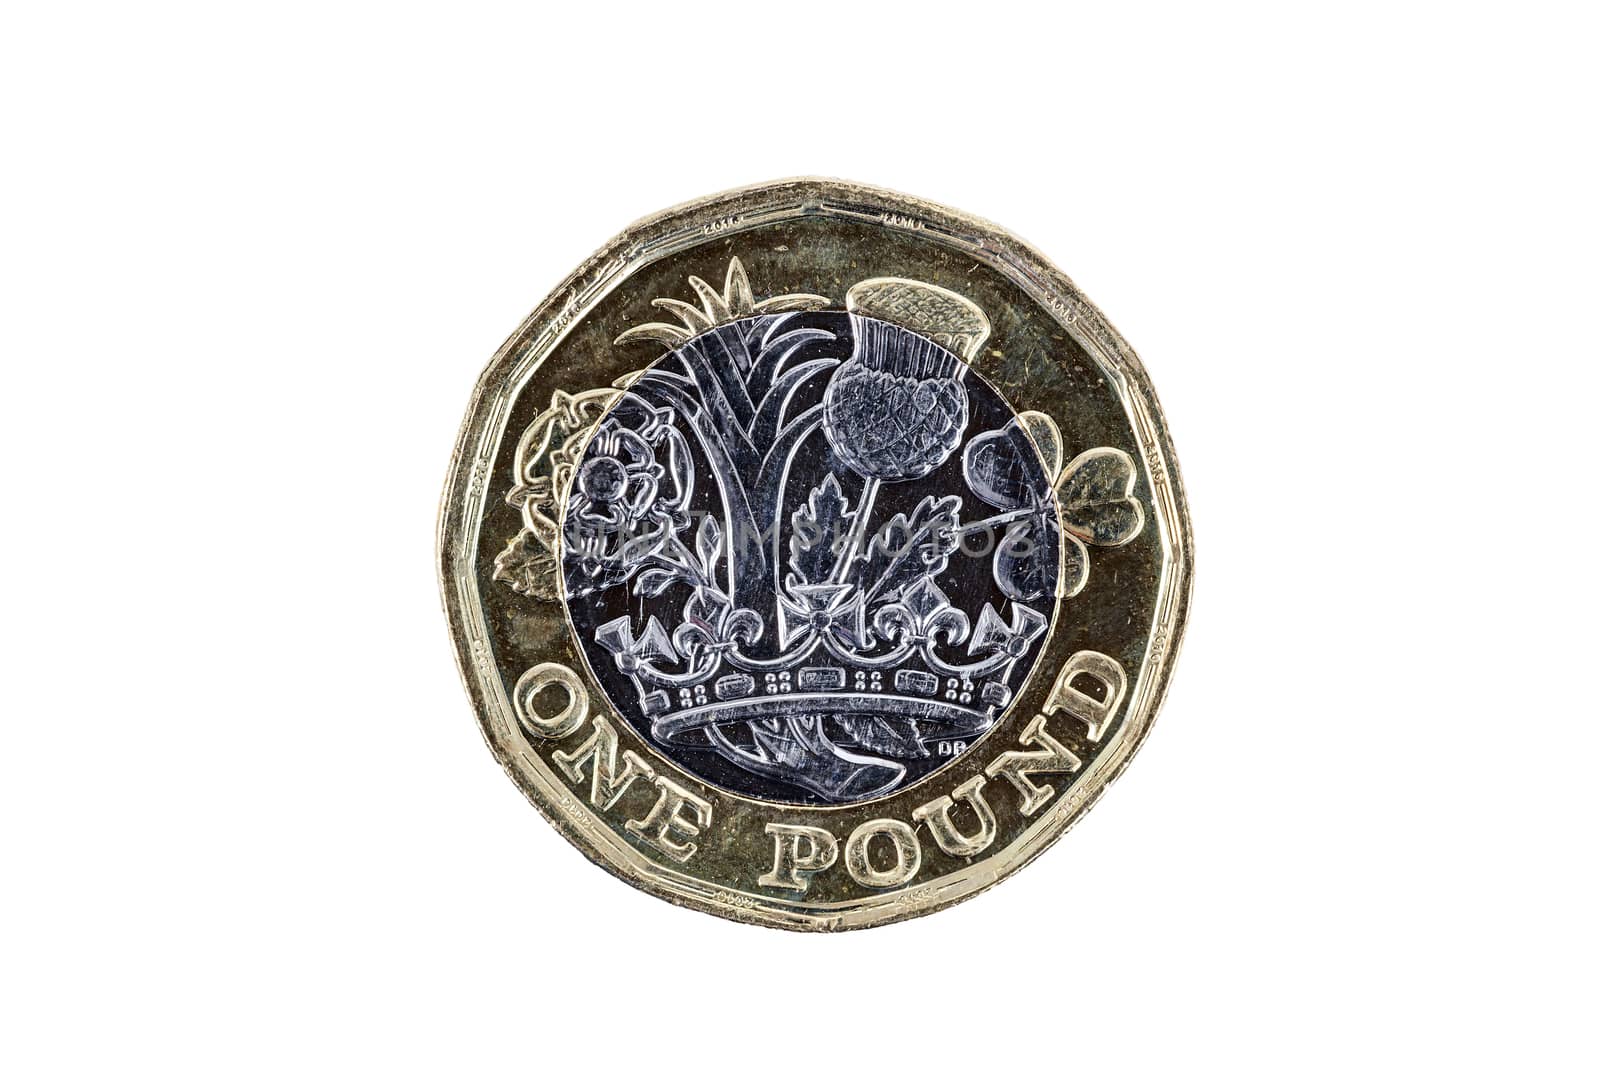 New one pound British coin of England UK introduced in 2017 which show emblems of each of the nations cut out and isolated on a white background